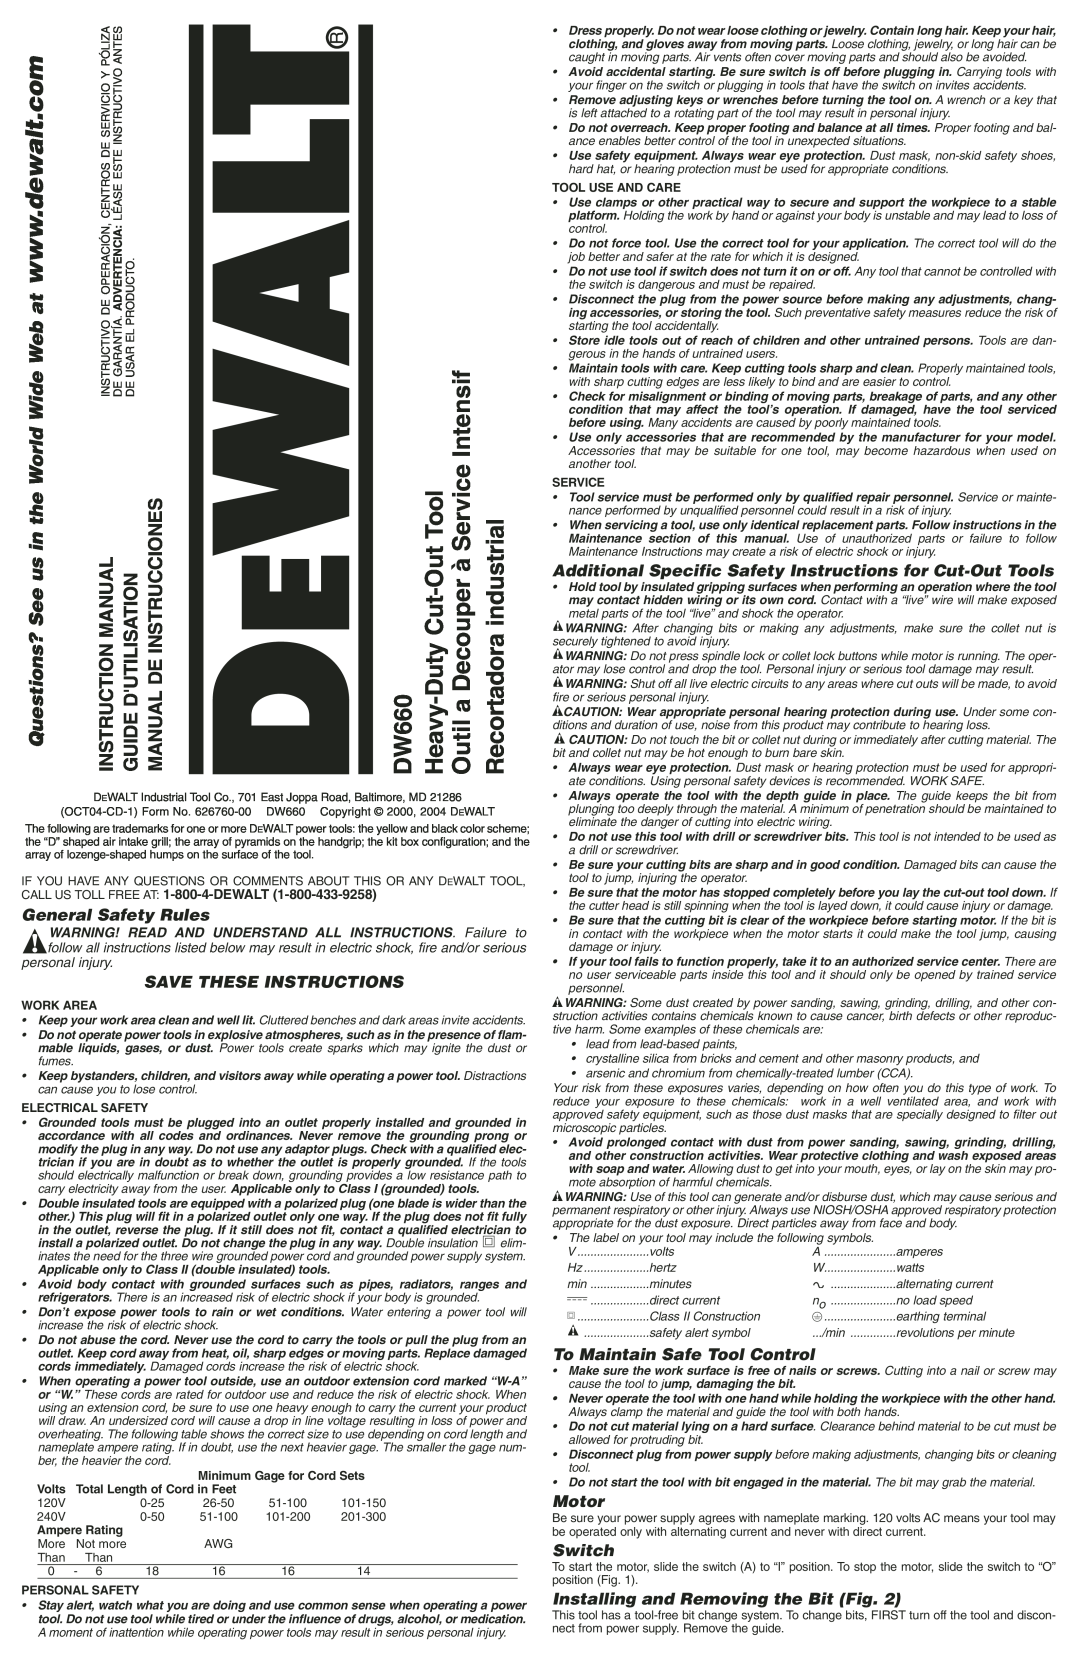 DeWalt DW660 instruction manual Manual De Instrucciones, personal injury, Work Area, Electrical Safety, Ampere Rating 